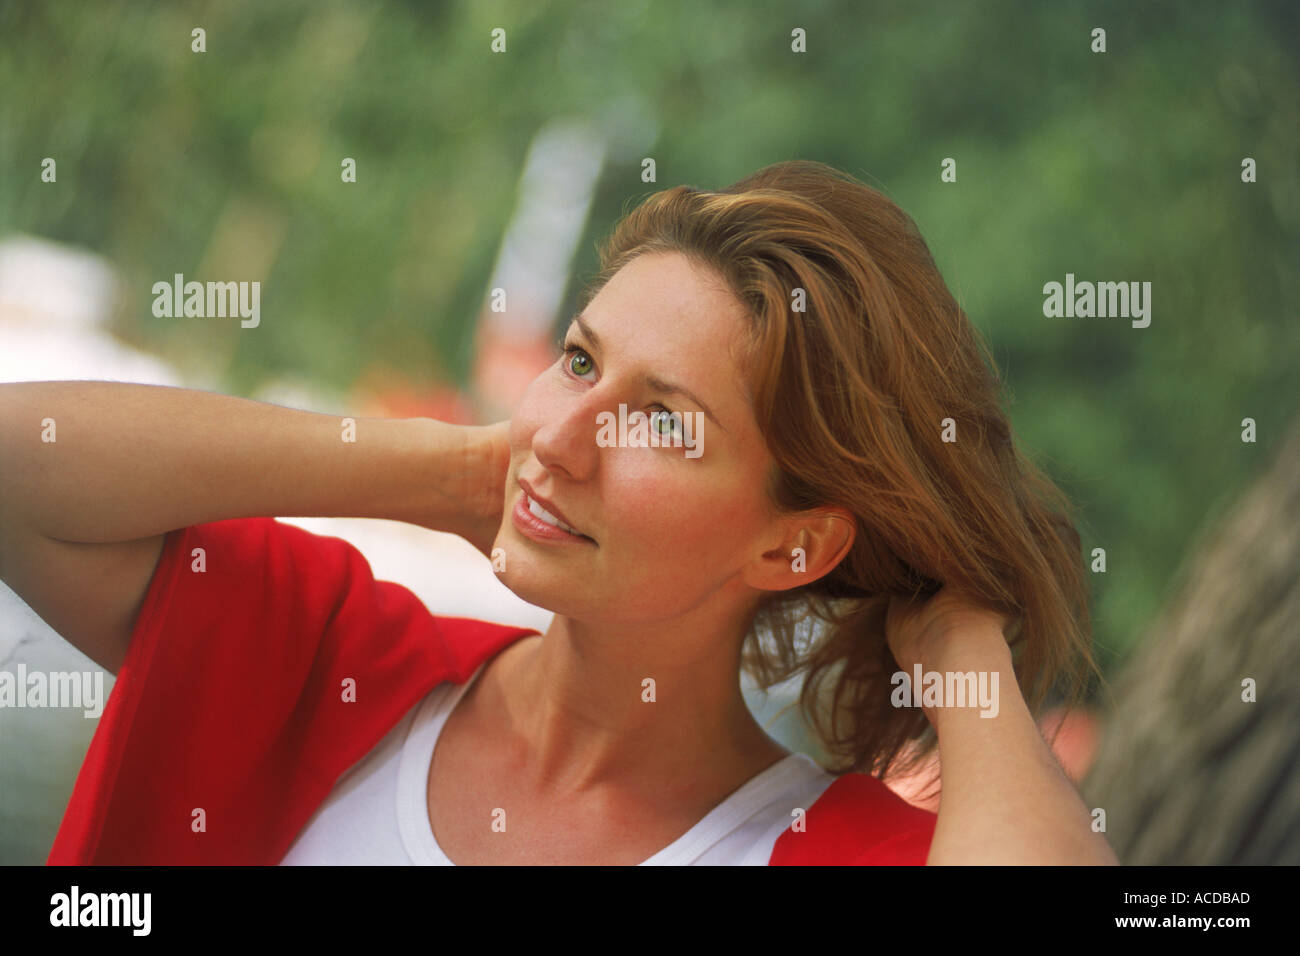 Woman with auburn hair and red sweater in happy mood Stock Photo